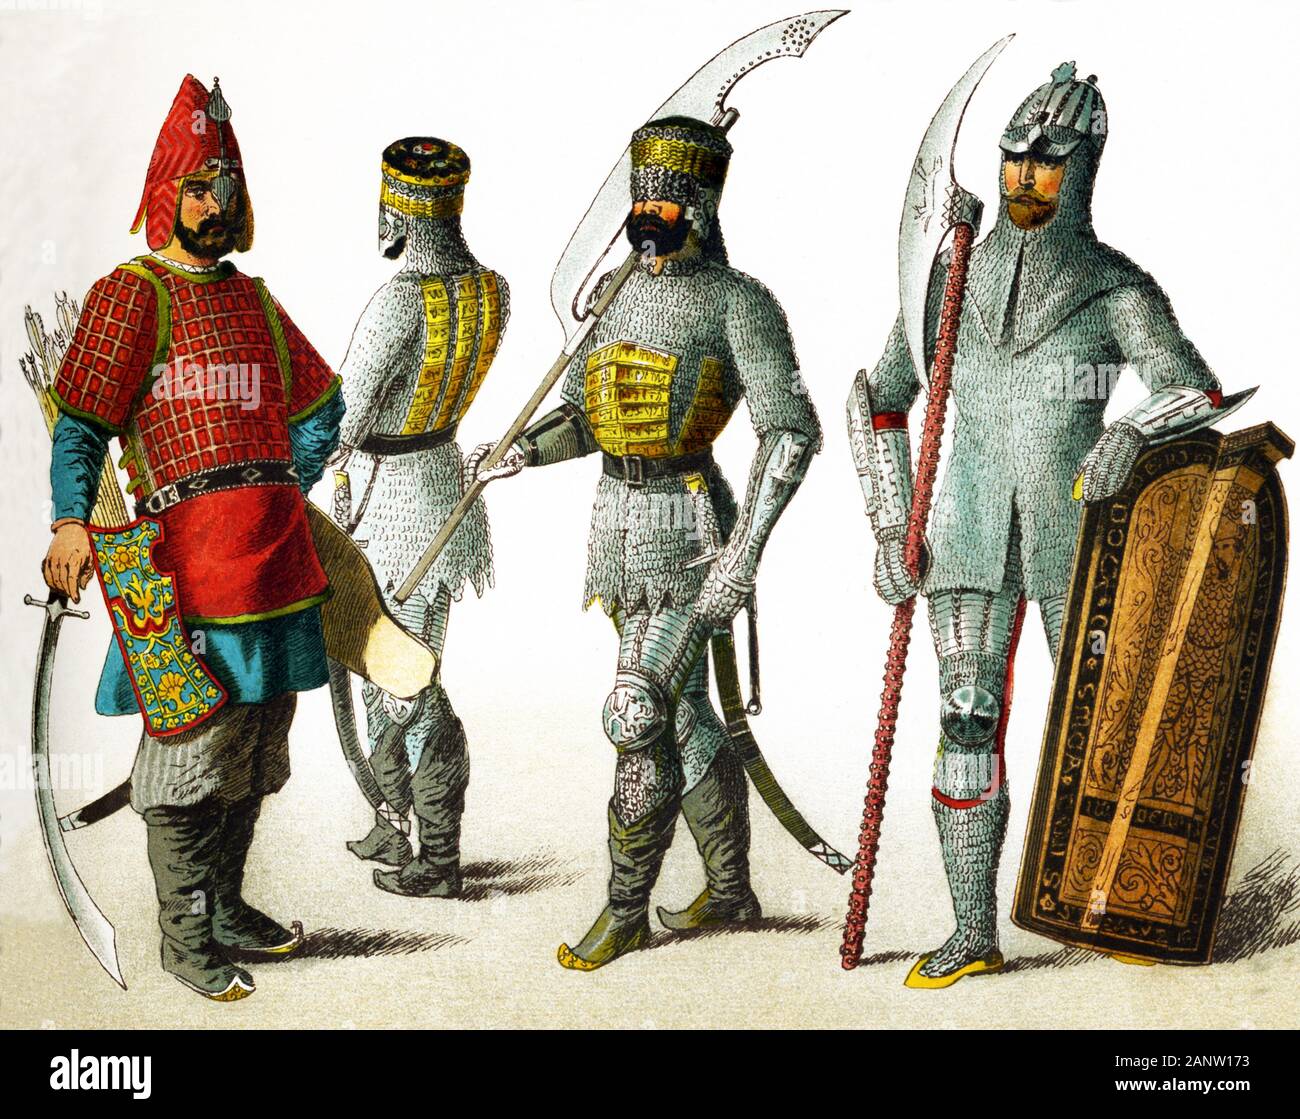 The figures here represent Slavonic warriors in A.D. 1400. They are, from left to right: three Russian warriors and one Bohemian warrior. Bohemia is  an historic province in western Czechoslovakia with its capital at  Prague. The illustration dates to 1882. Stock Photo